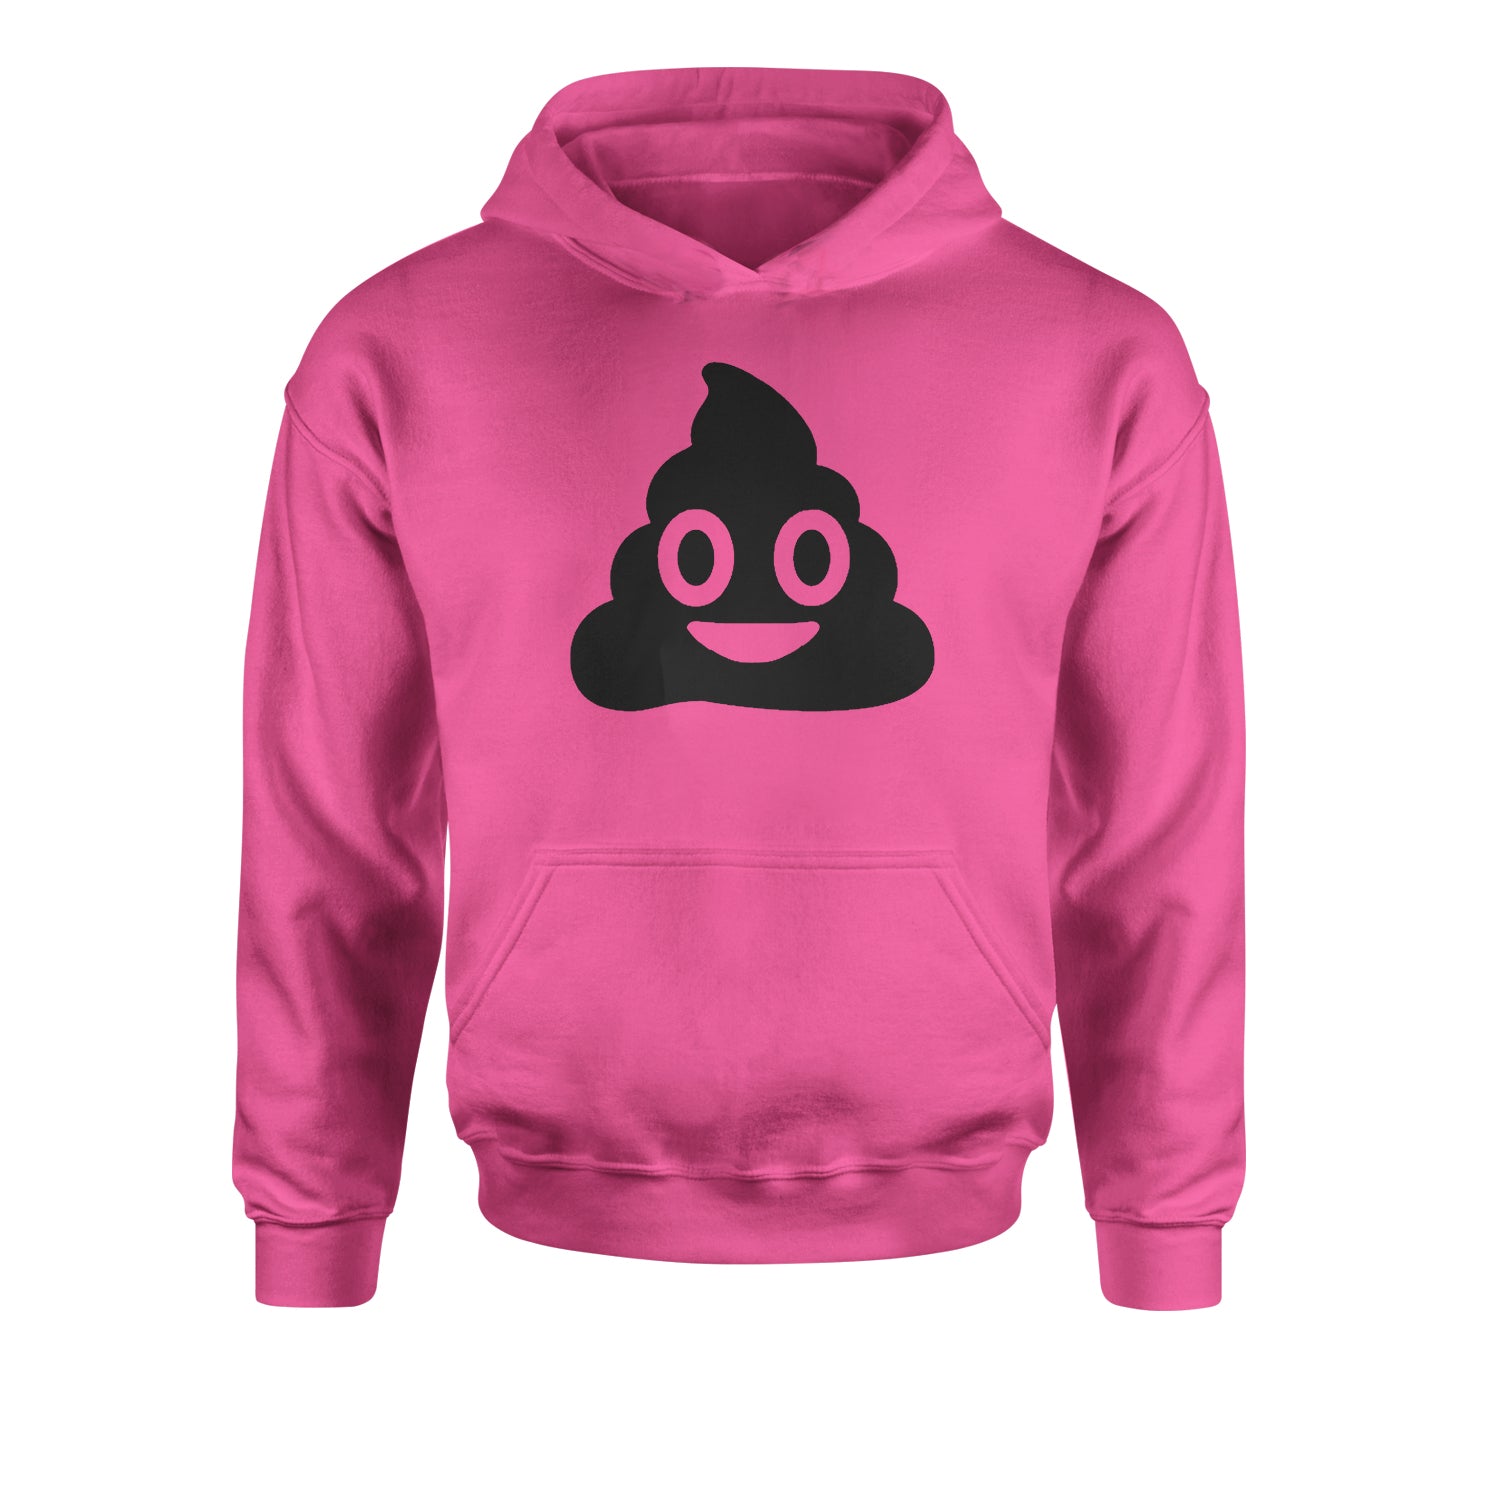 Emoticon Poop Face Smile Face Youth-Sized Hoodie cosplay, costume, dress, emoji, emote, face, halloween, smiley, up, yellow, youth-sized by Expression Tees